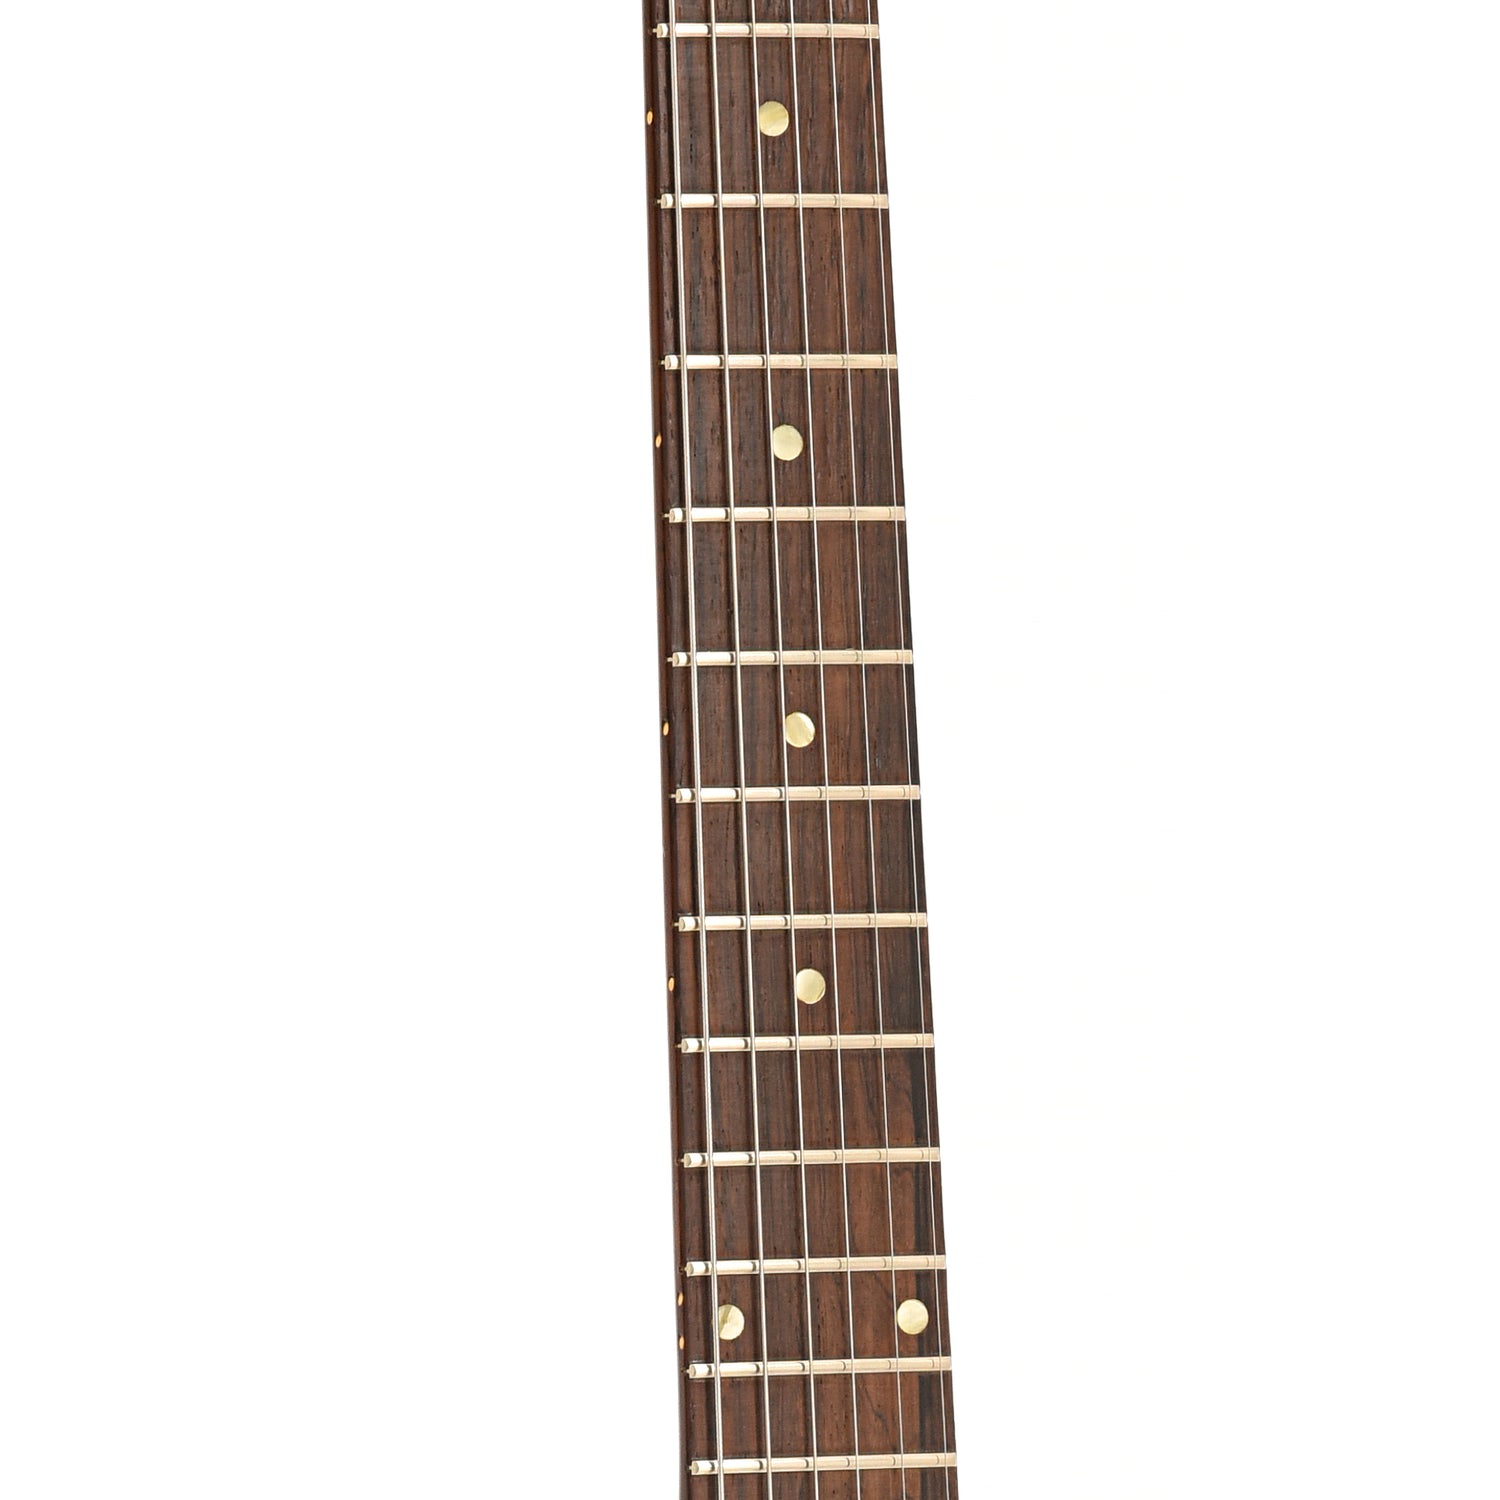 Fretboard of Gibson Melody Maker D